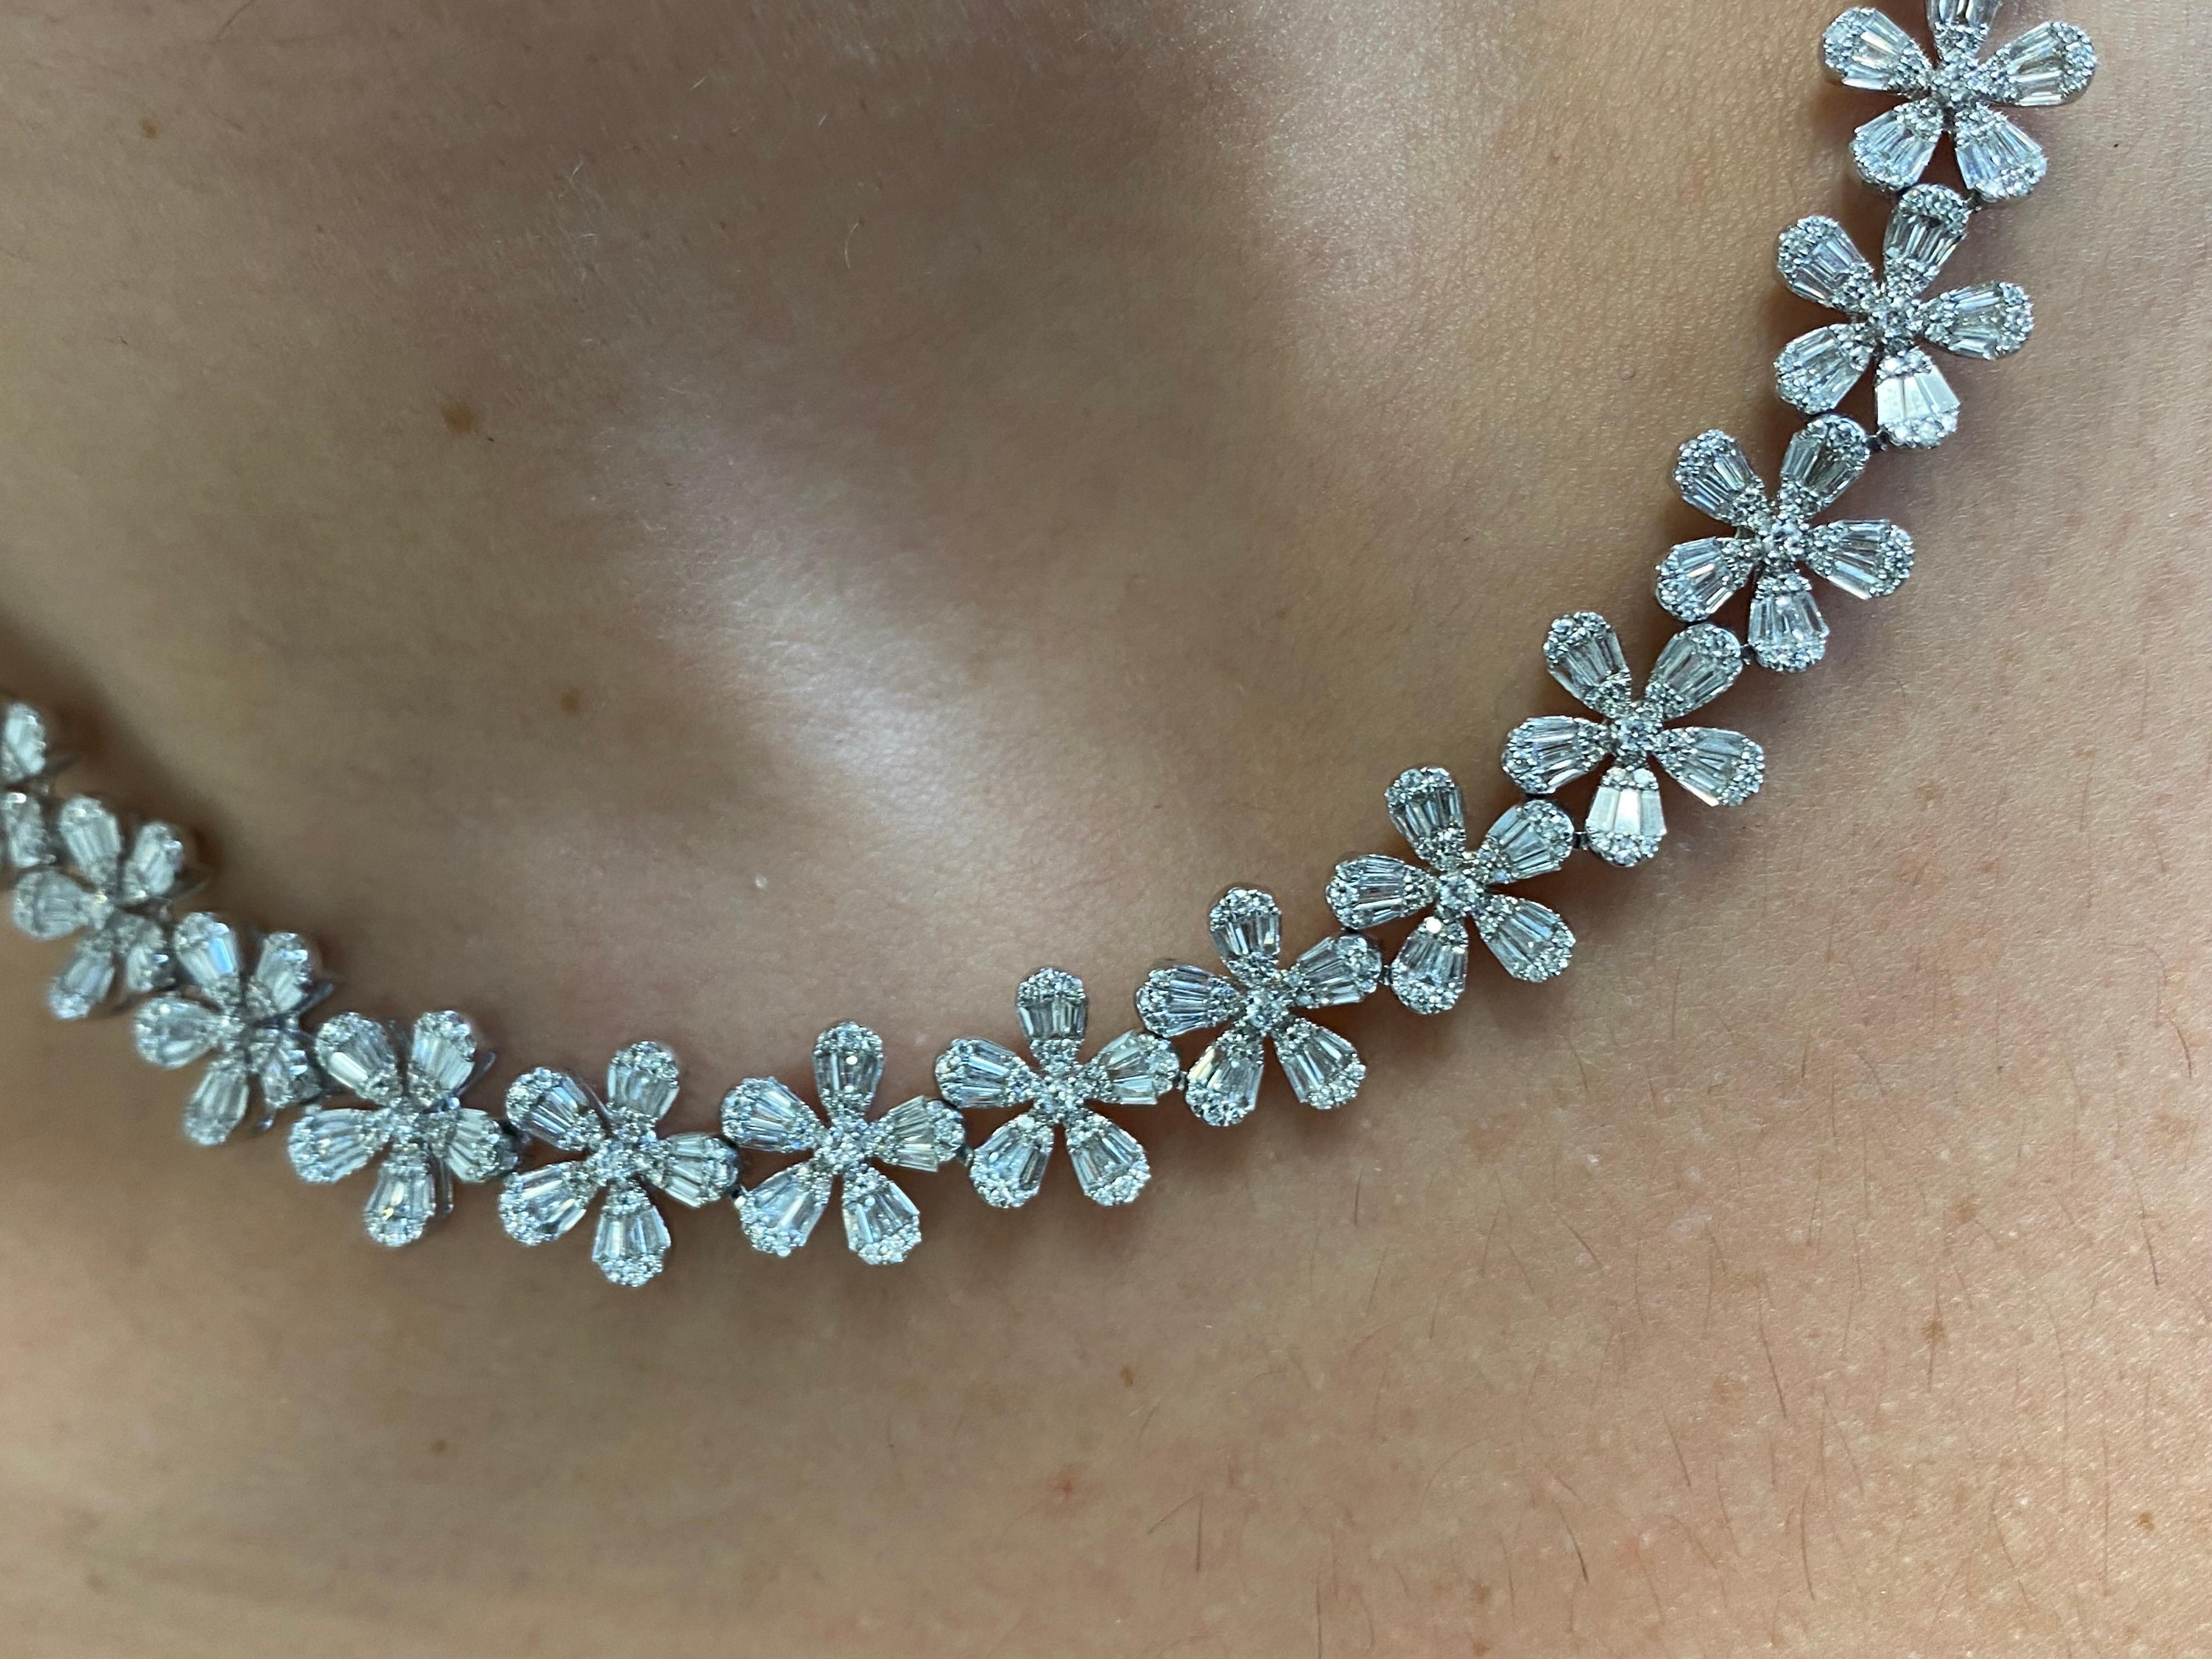 Flower daisy necklace set in 18K white gold. The necklace is set with a cluster of baguette and round diamonds. The color of the stones are F, the clarity is VS1-VS2. The total diamonds weight is 4.95 carats. The necklace is 18 Inches, but can be